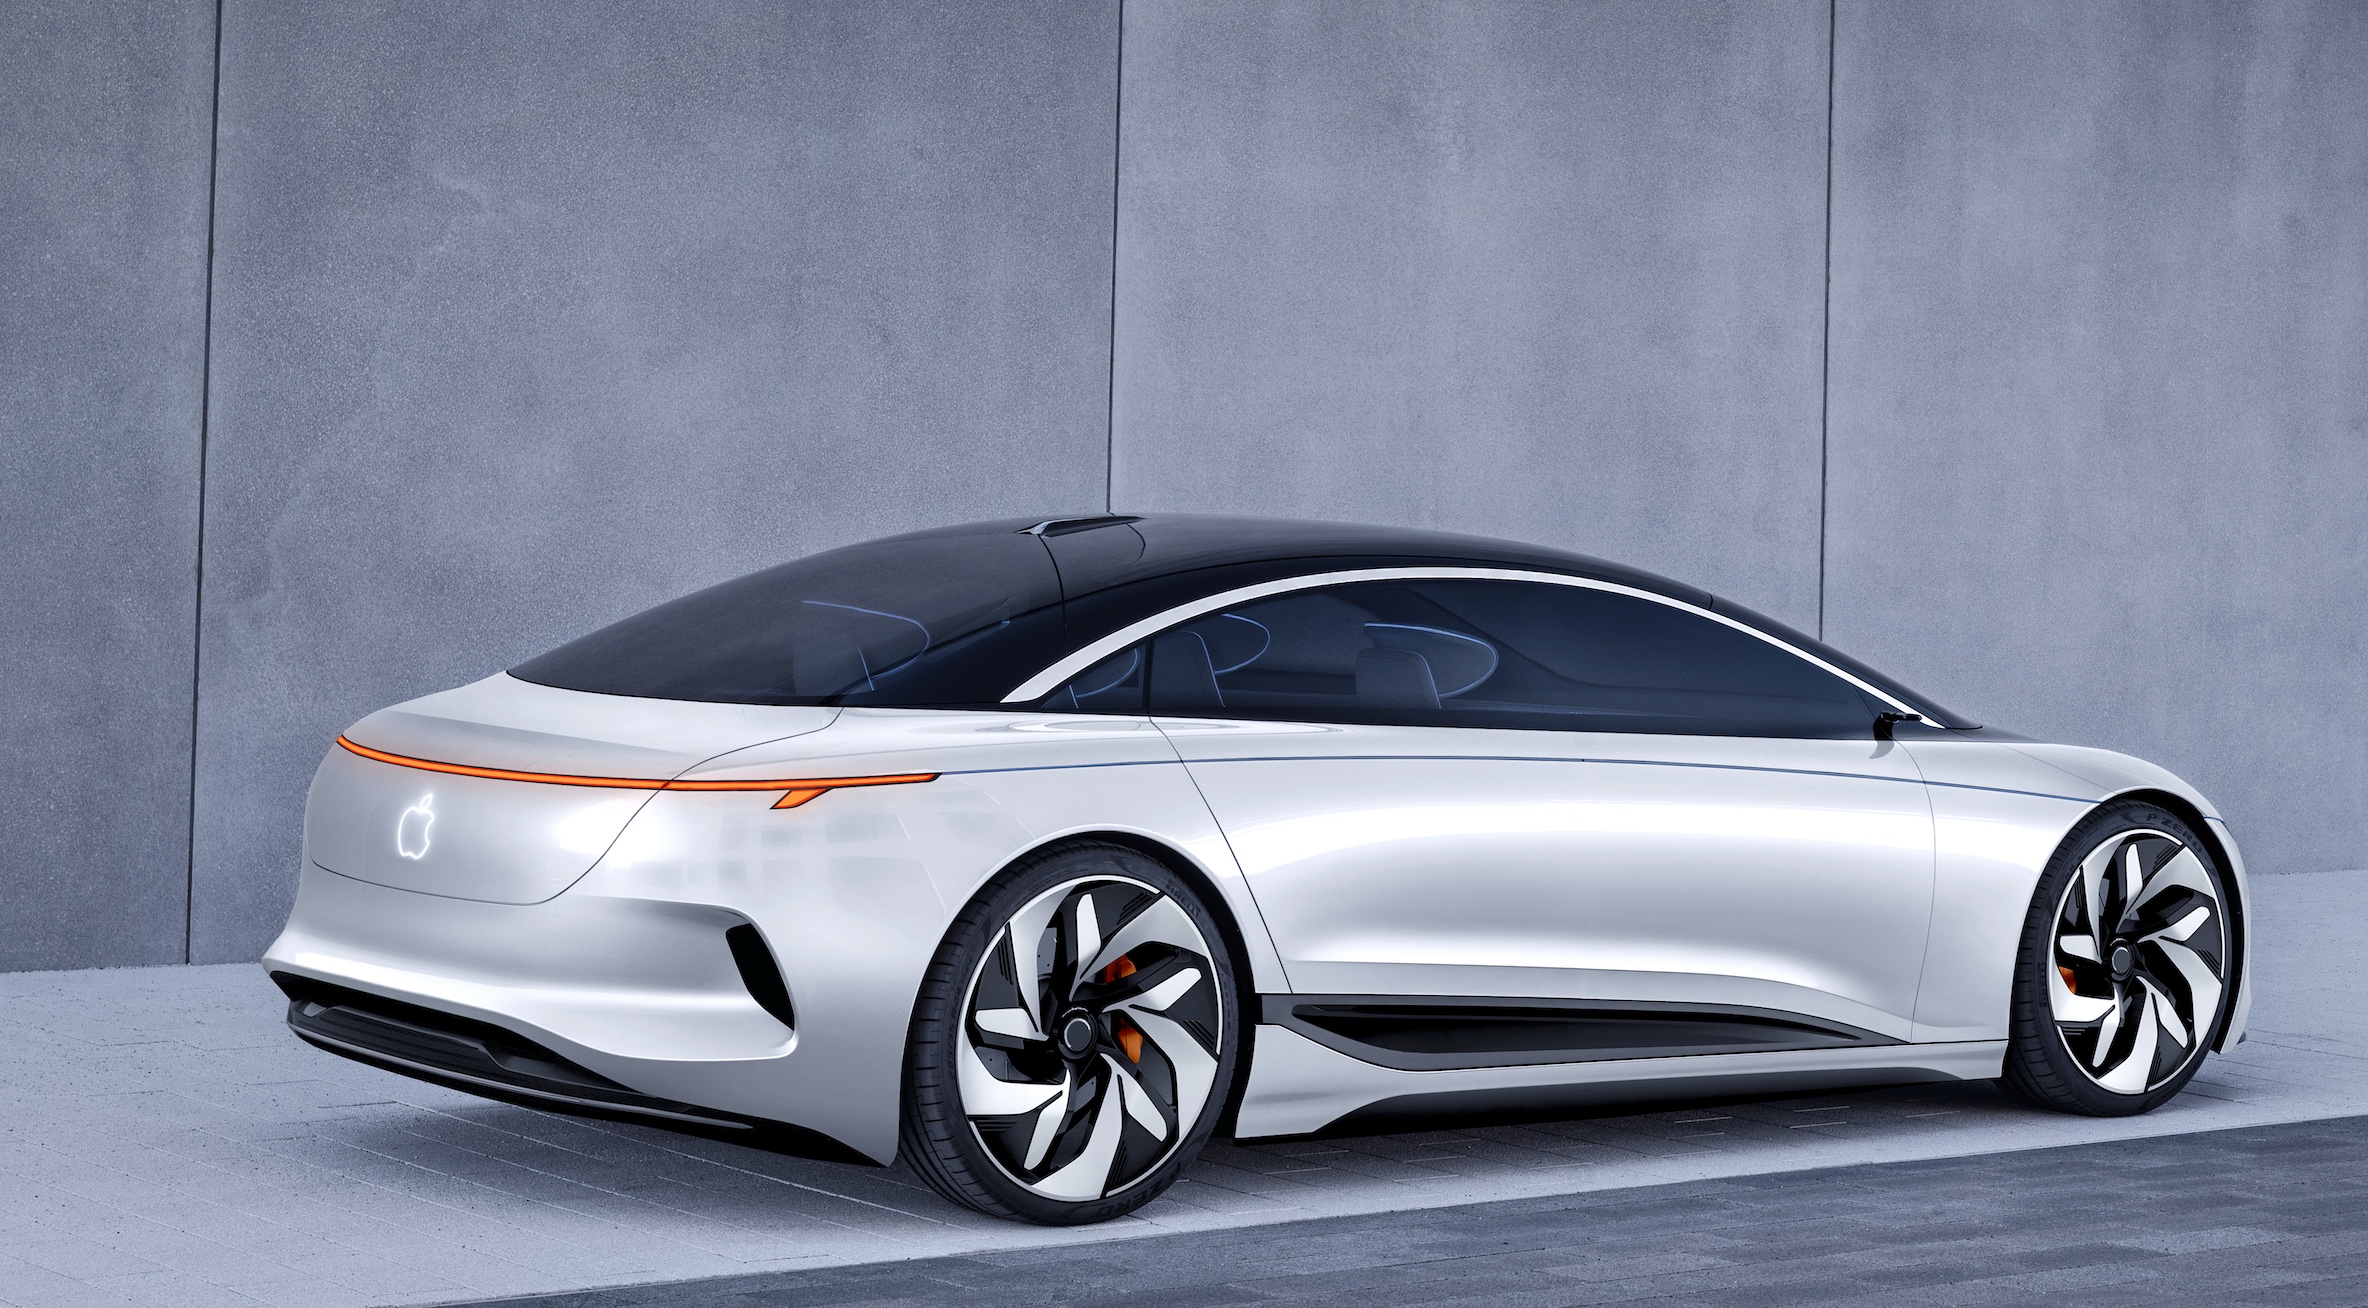 Kuo: Development of Apple Car Has 'Lost All Visibility' - MacRumors